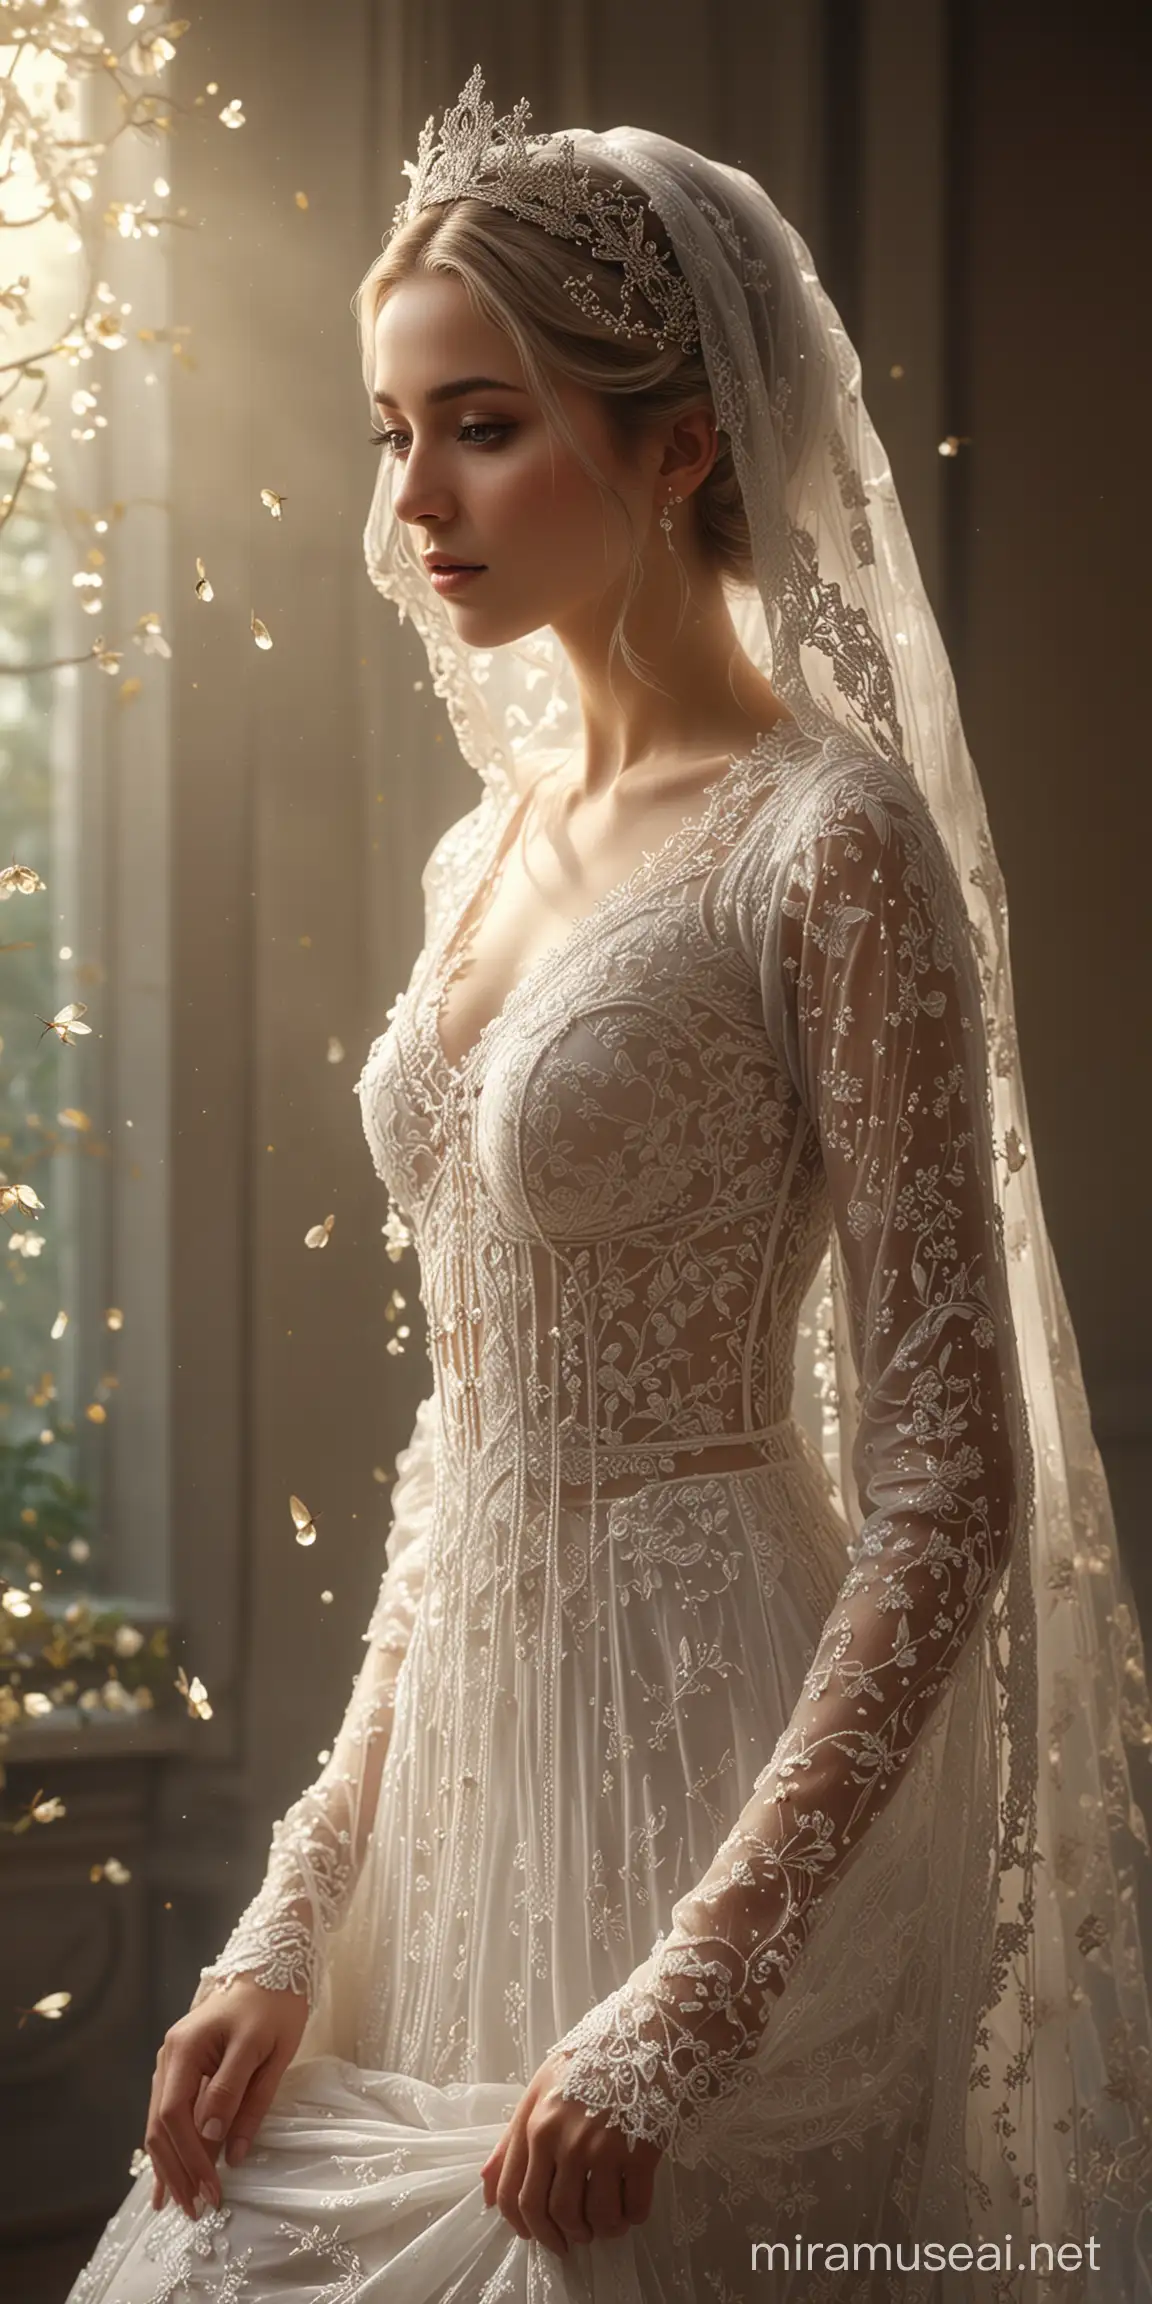 Ethereal Angel in Lace Dress with Natures Glow